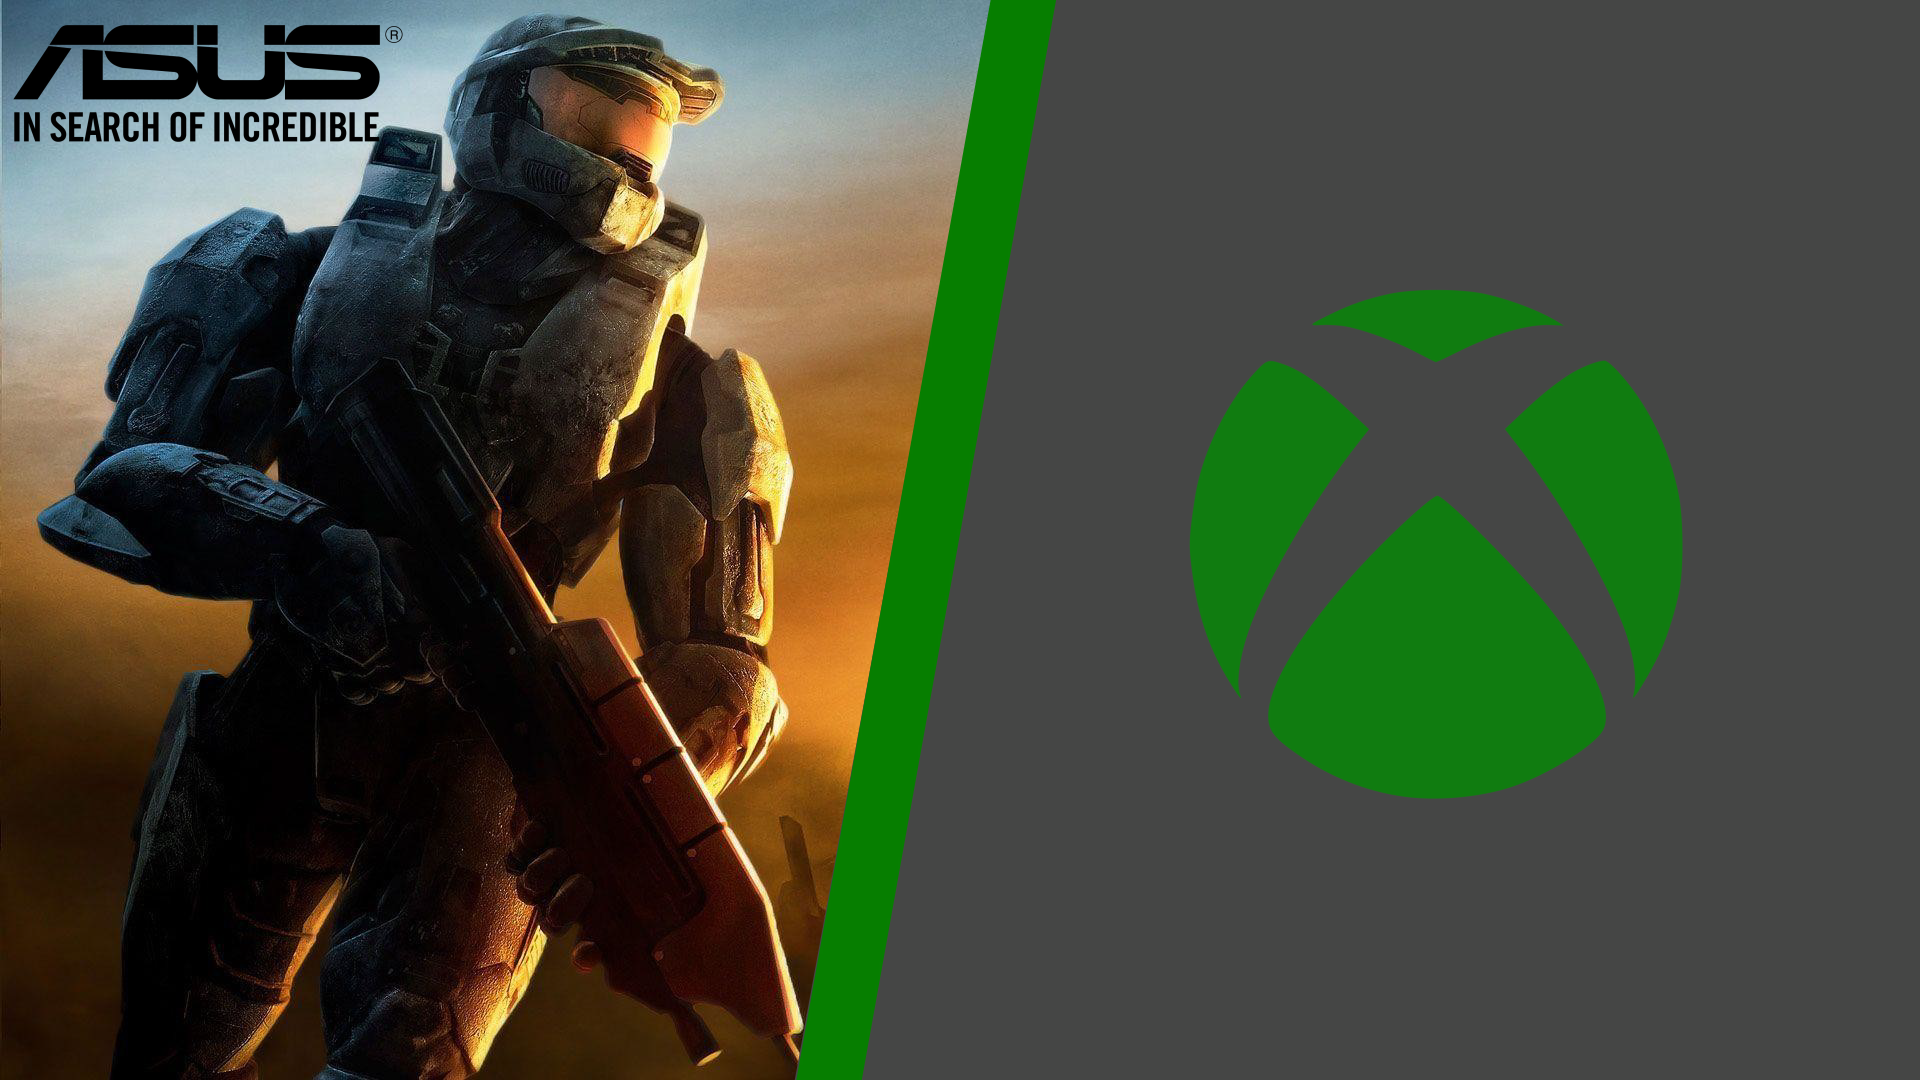 General 1920x1080 Xbox ASUS Halo (game) armor Master Chief (Halo) logo helmet gun sunset glow sunset video games video game characters